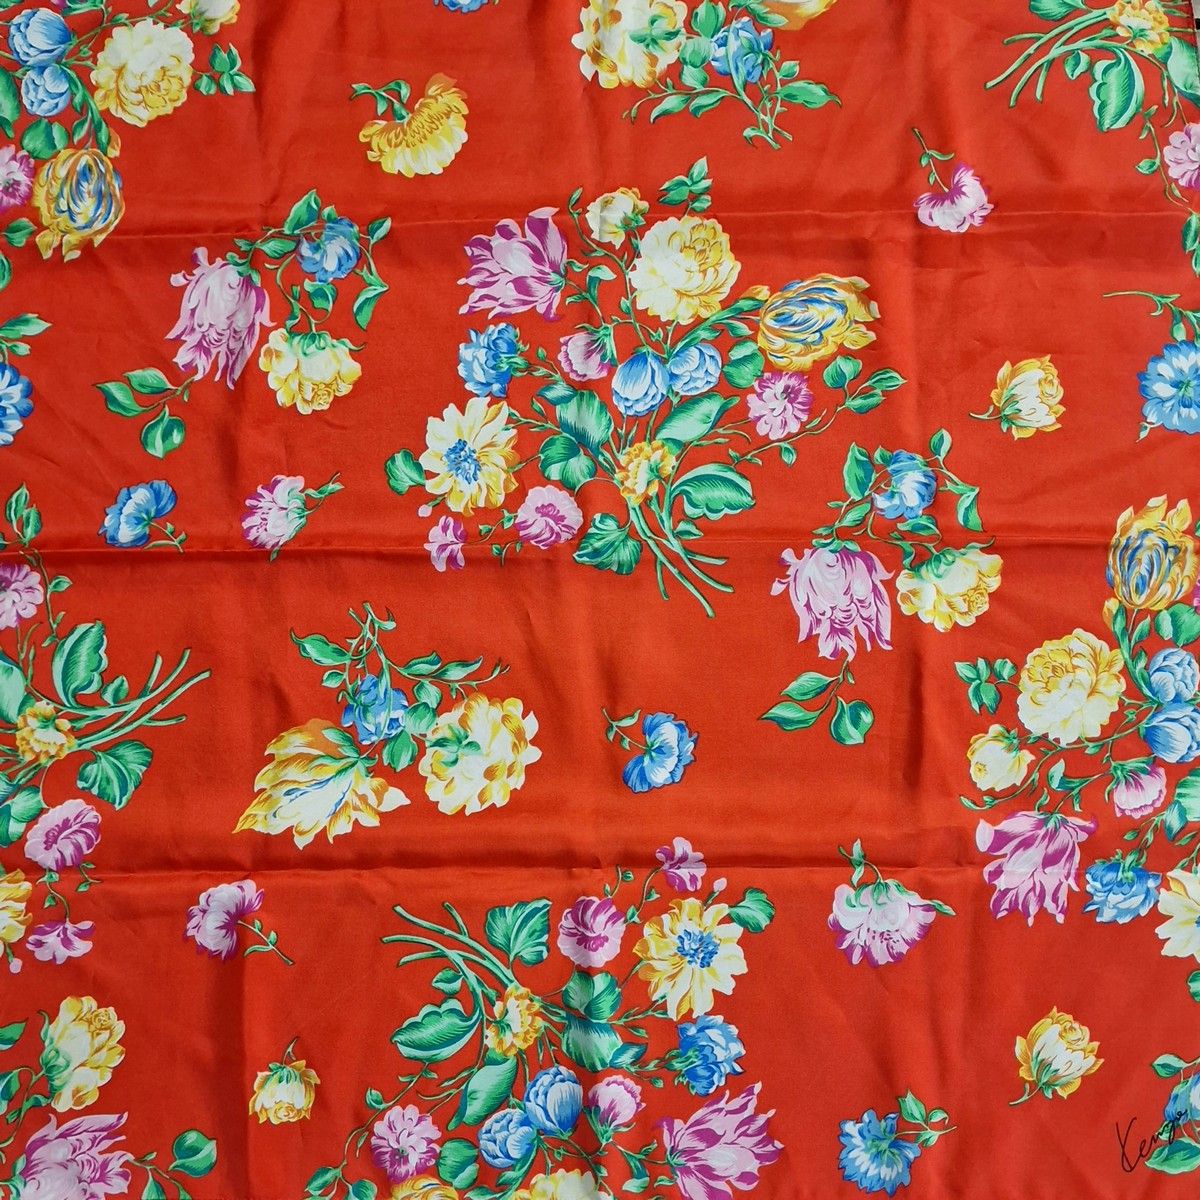 Null KENZO - Silk FOULARD with polychrome flowers on red background
Christian DI&hellip;